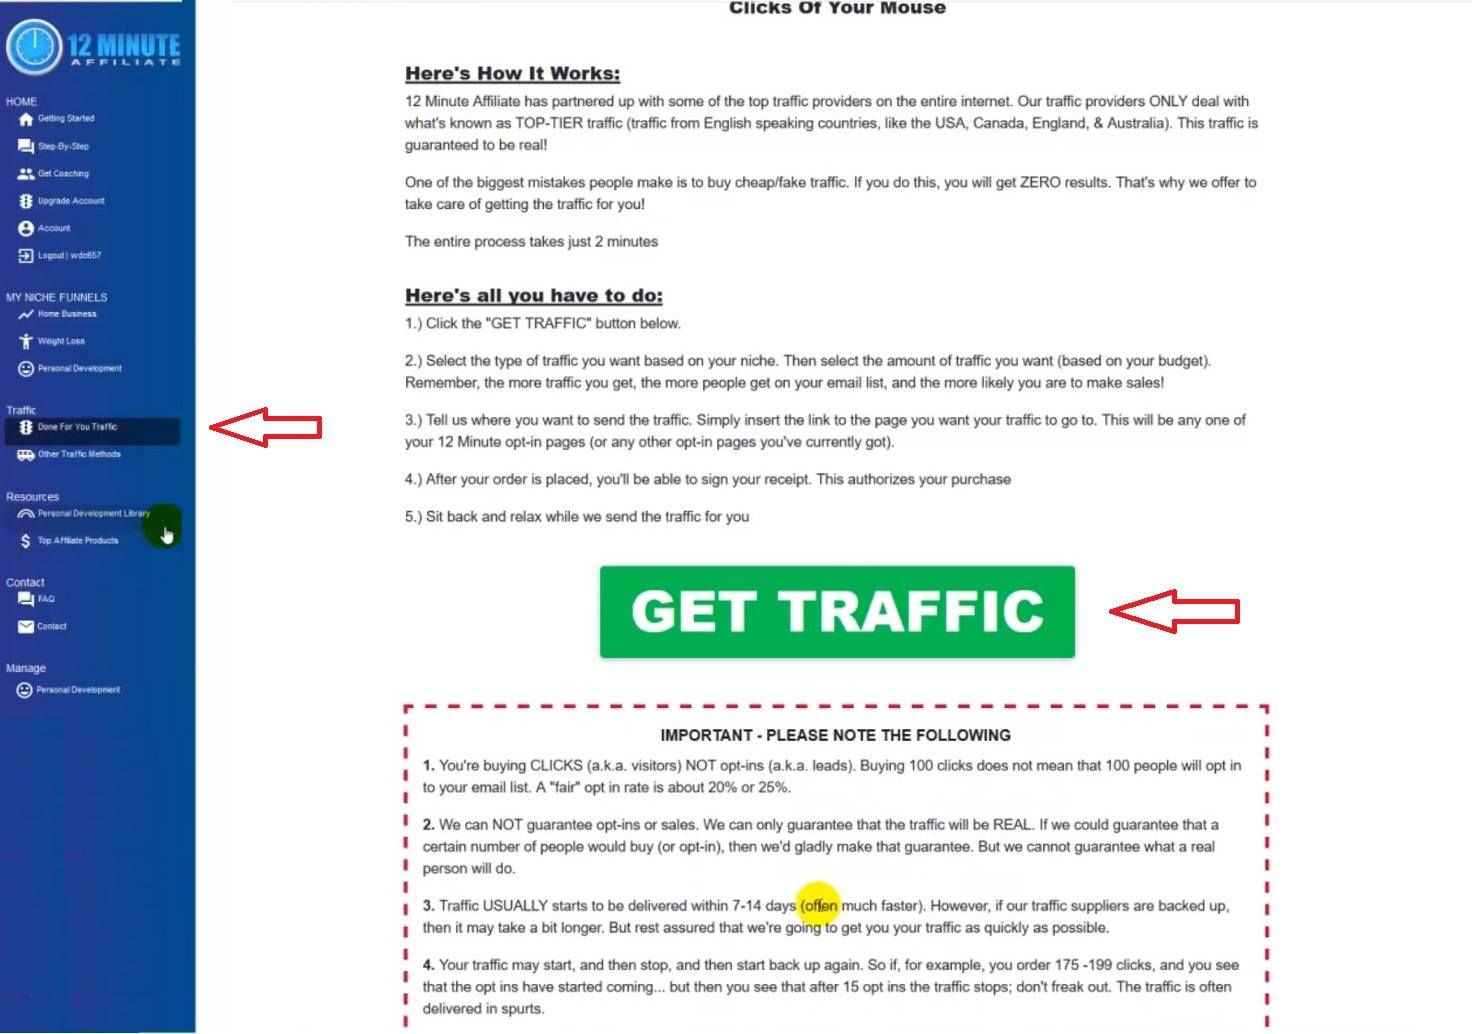 12 Minute Affiliate's "get traffic" upsell